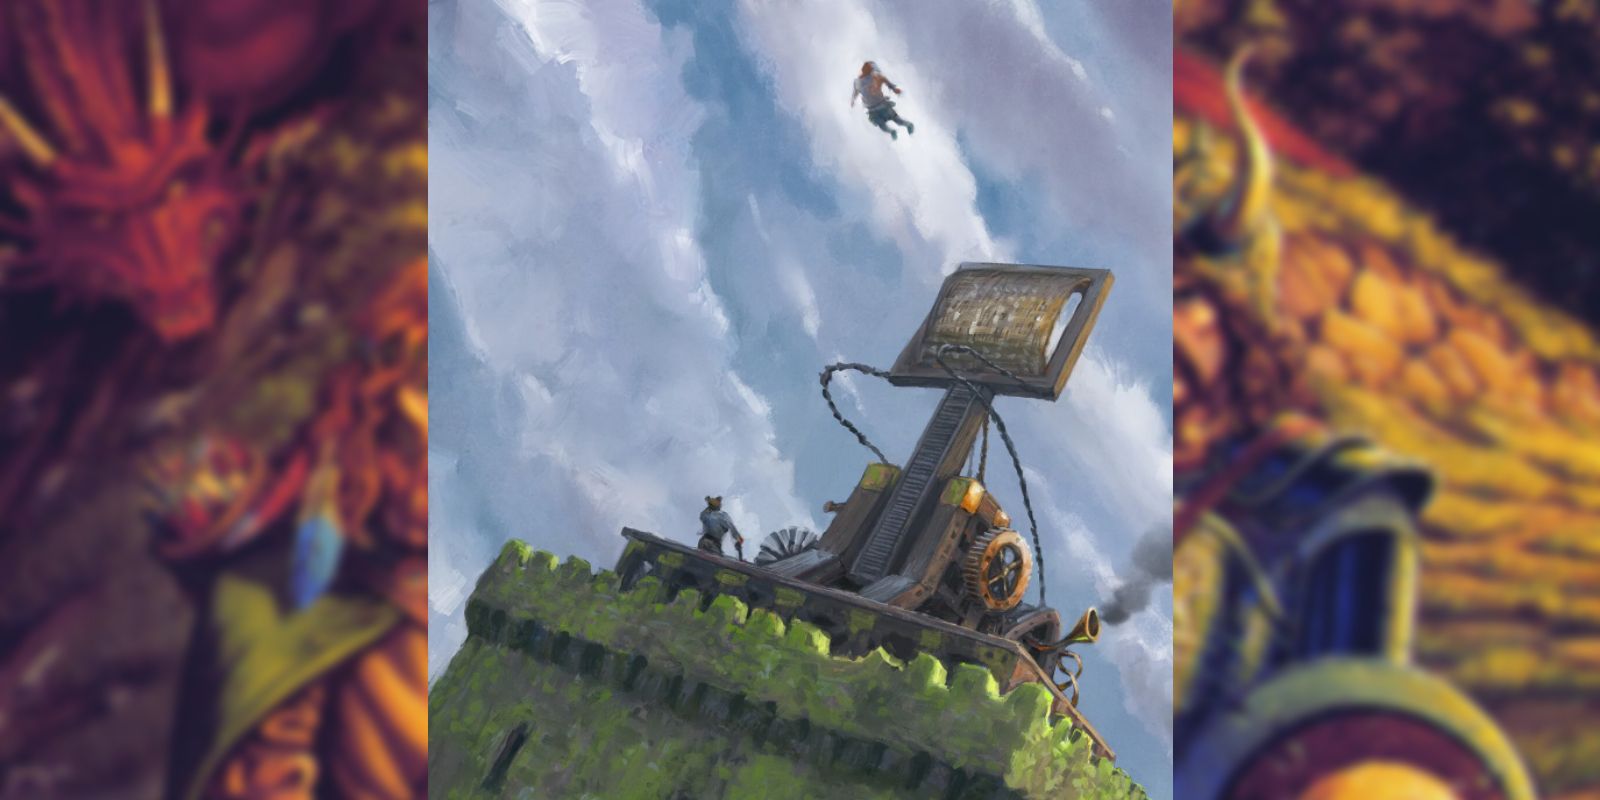 A Gnomeflinger atop a castle tower - a catapult designed to fling gnomes.